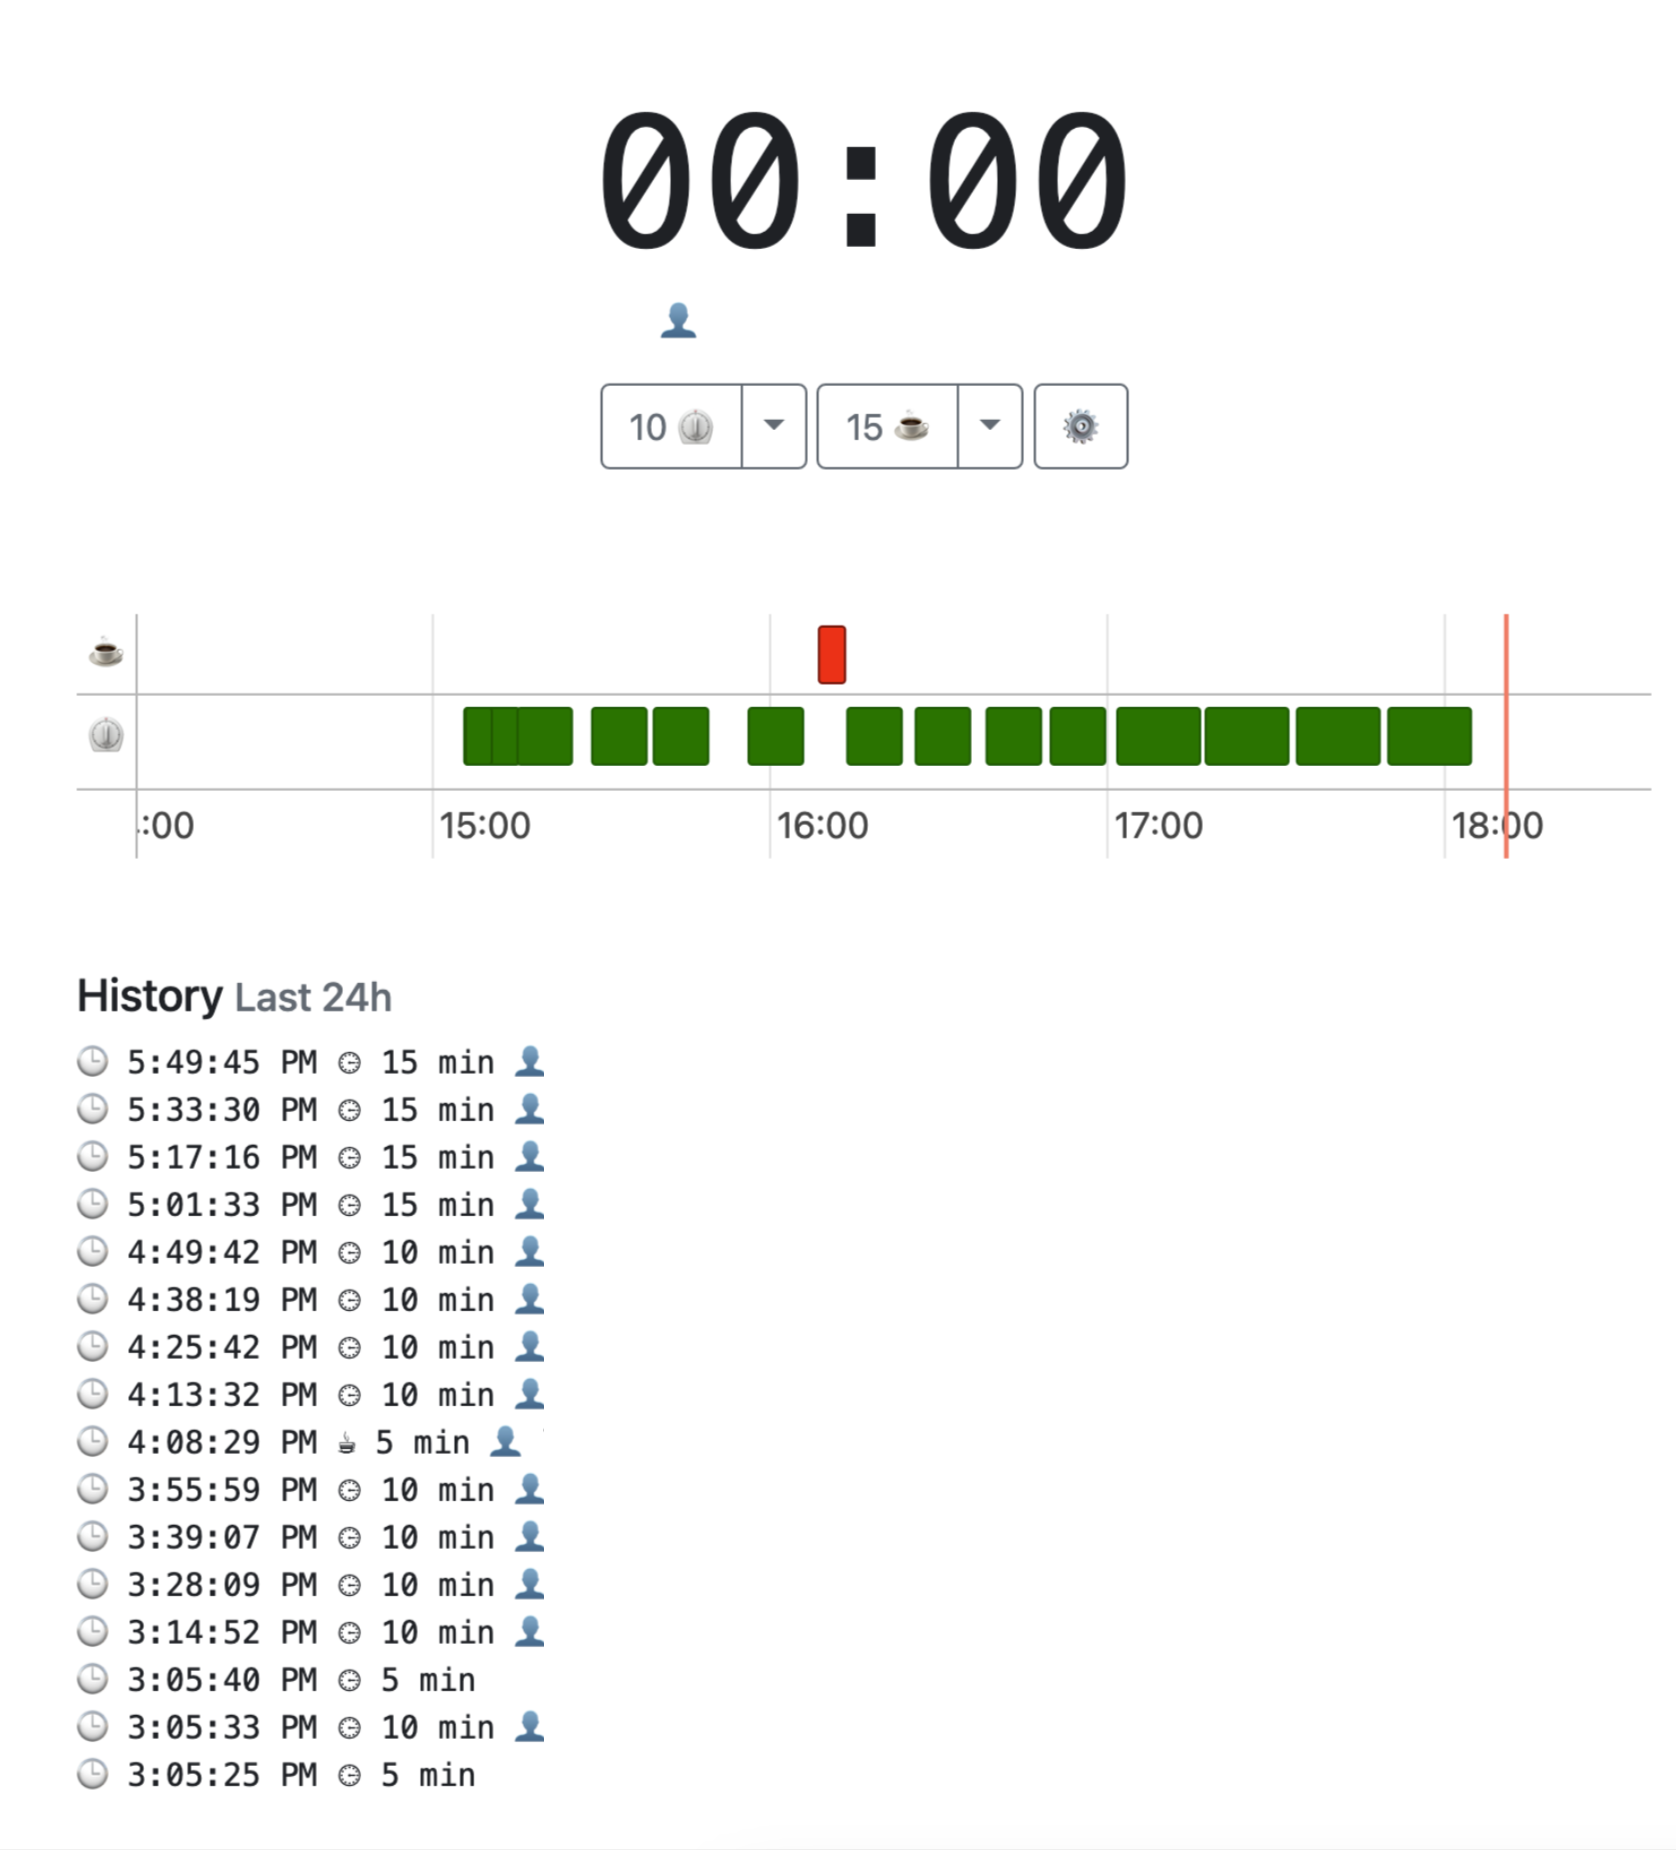 Image of the site that tracks the time, showing the spent time in a graph and also the timestamps of the participants.